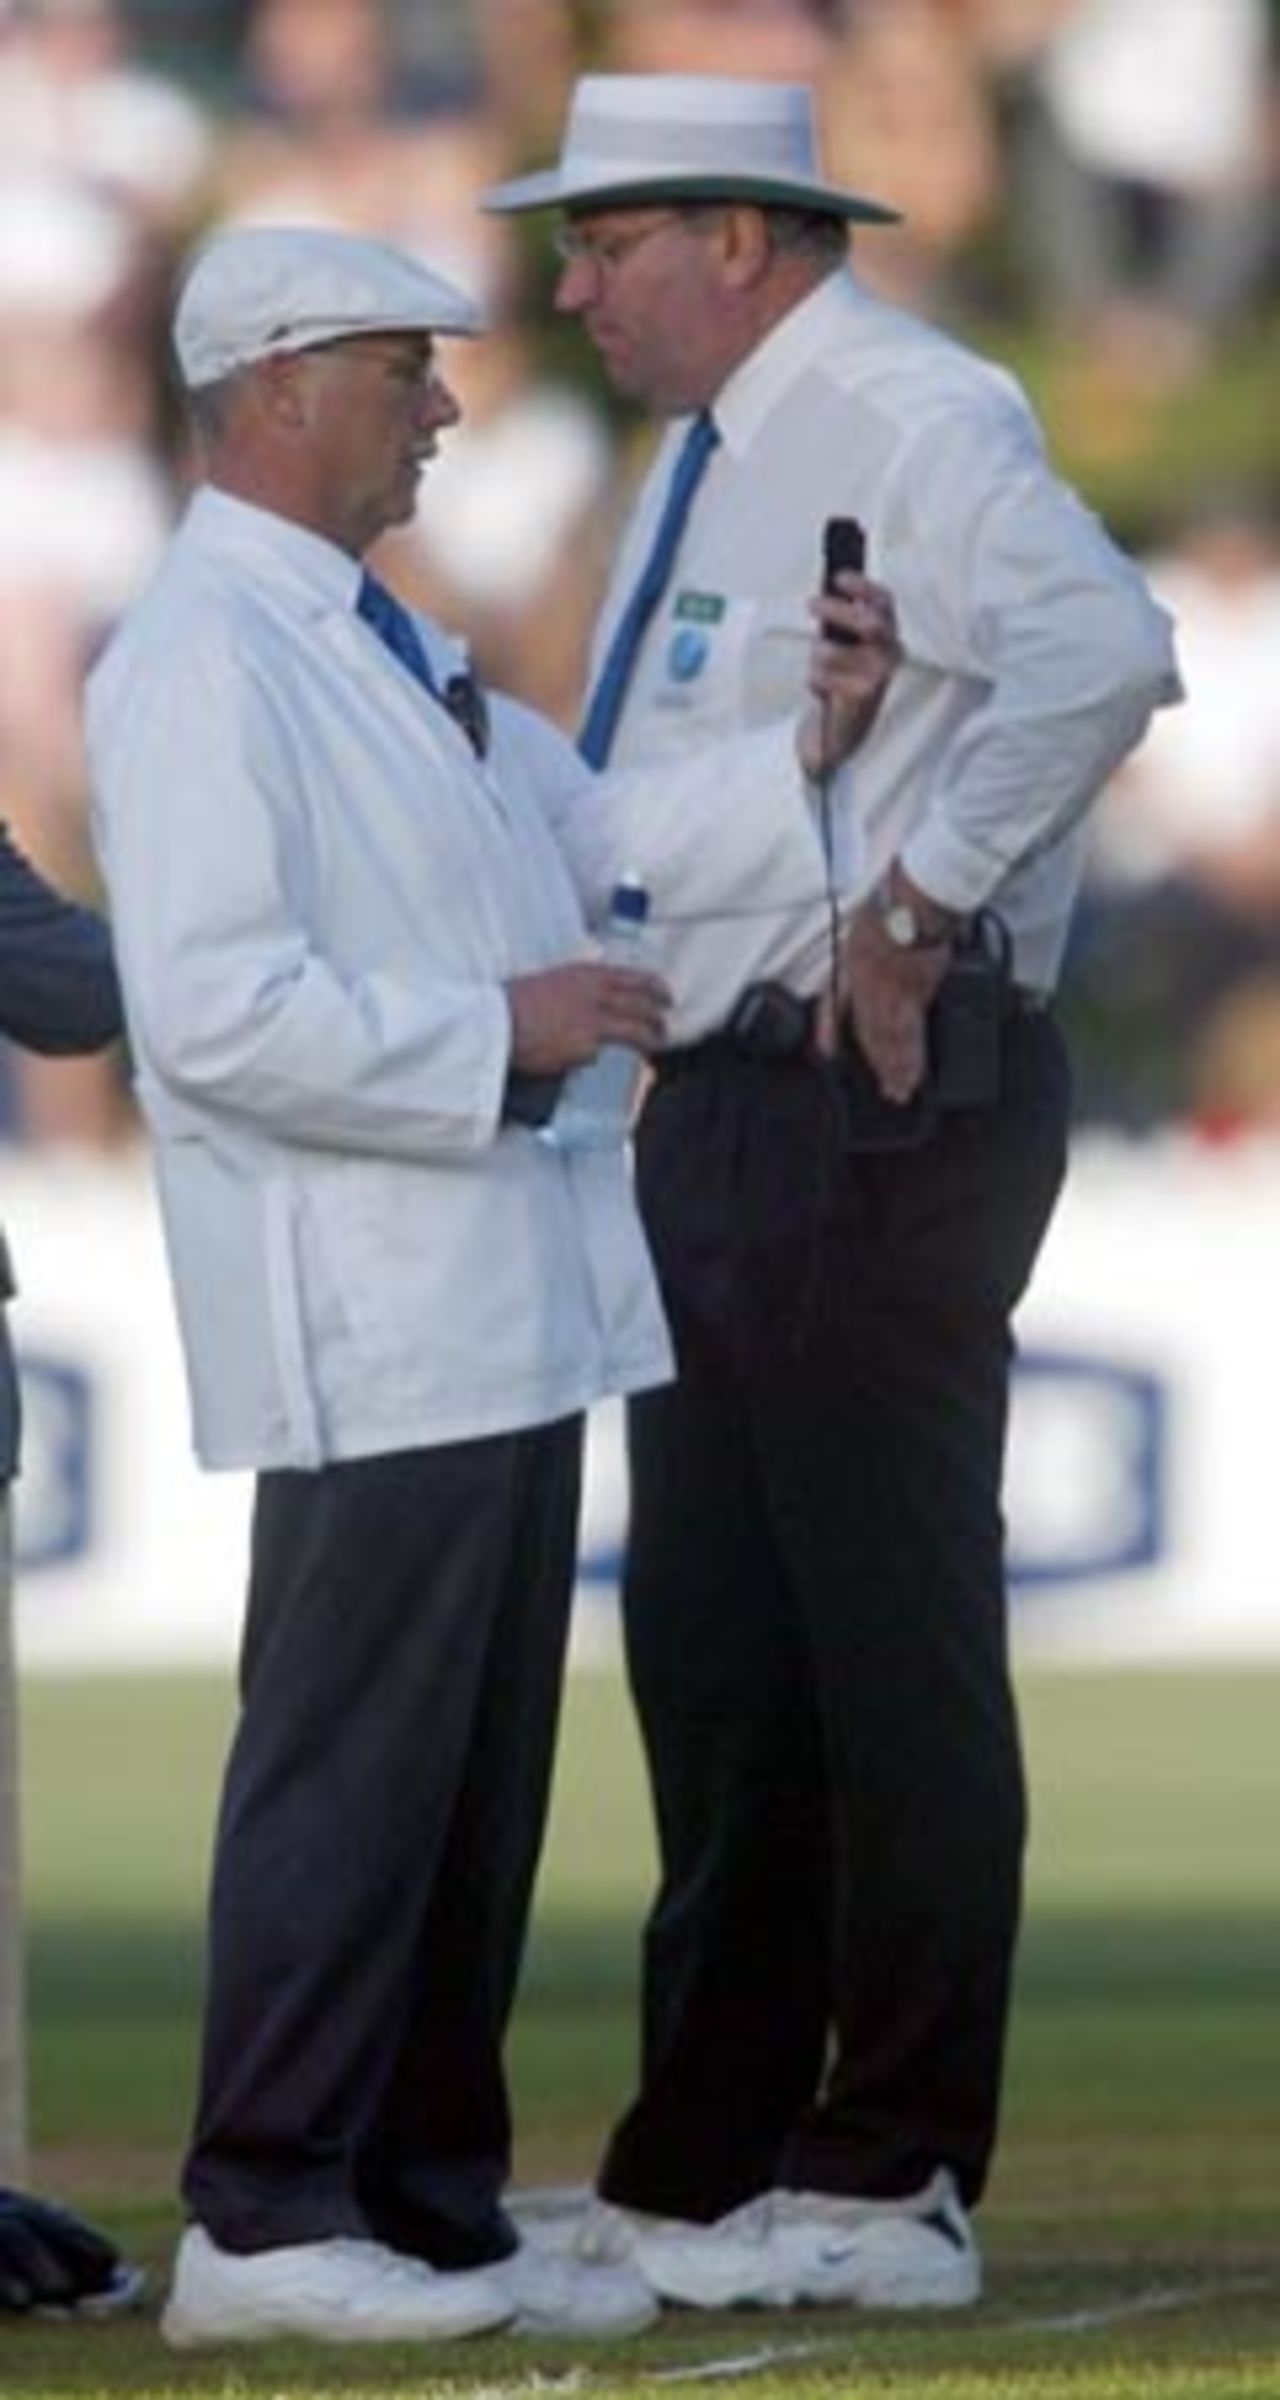 Umpires Steve Dunne (left) and Darrell Hair (Australia) consult over the light conditions. The light was offered to the England batsmen who accepted and left the field to end the second day's play with 15 overs left unbowled. 2nd Test: New Zealand v England at Basin Reserve, Wellington, 21-25 March 2002 (22 March 2002).